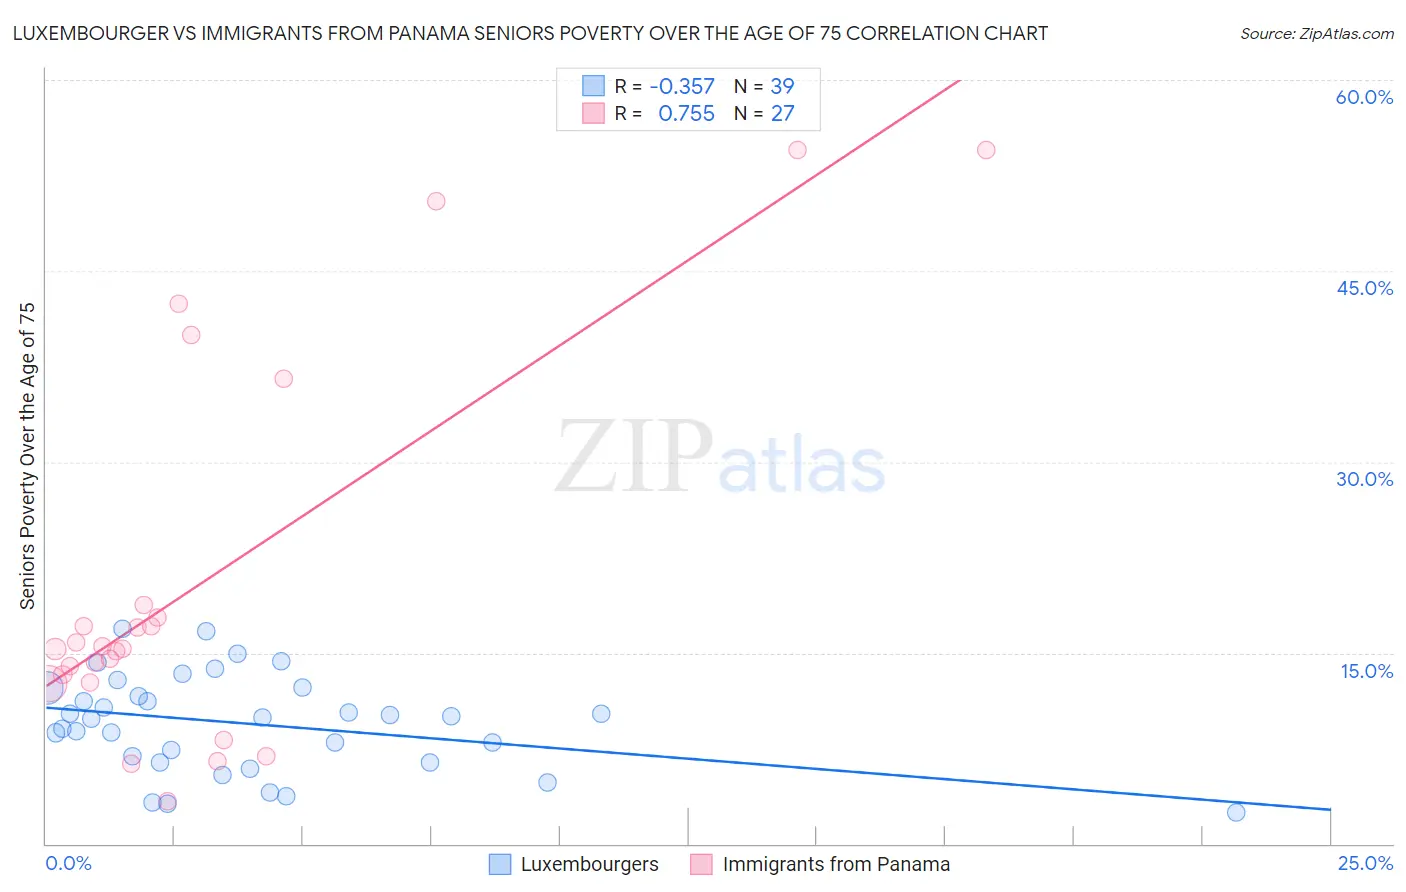 Luxembourger vs Immigrants from Panama Seniors Poverty Over the Age of 75